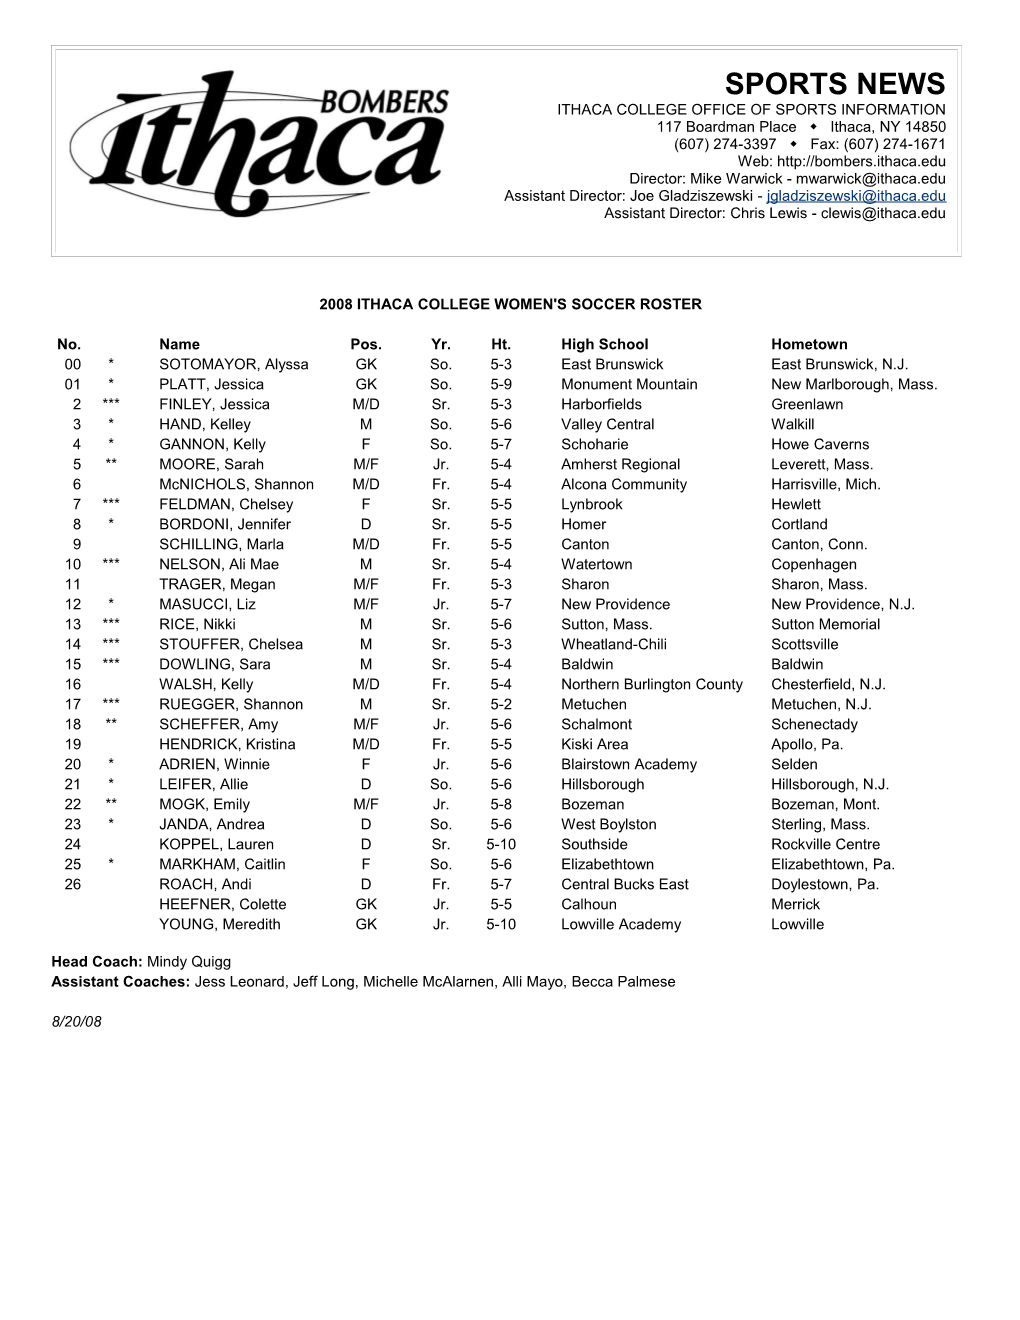 2008 Ithaca College Women's Soccer Roster